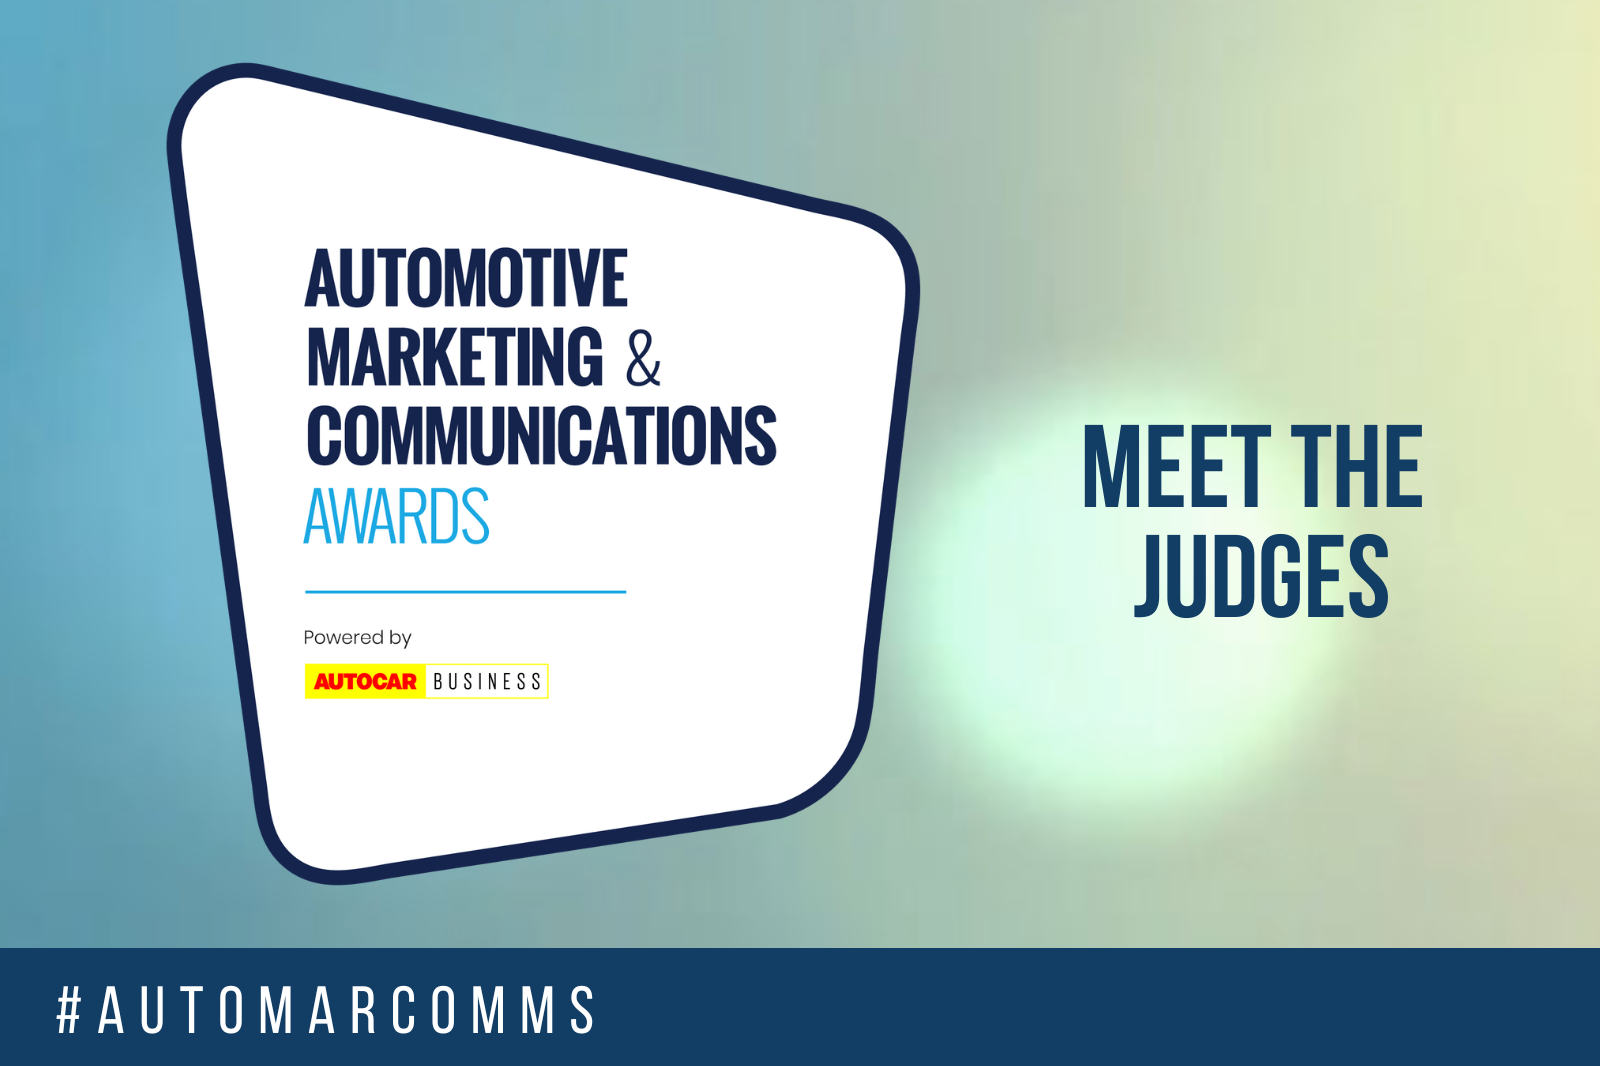 Automotive Marketing and Communications Awards: meet the judges